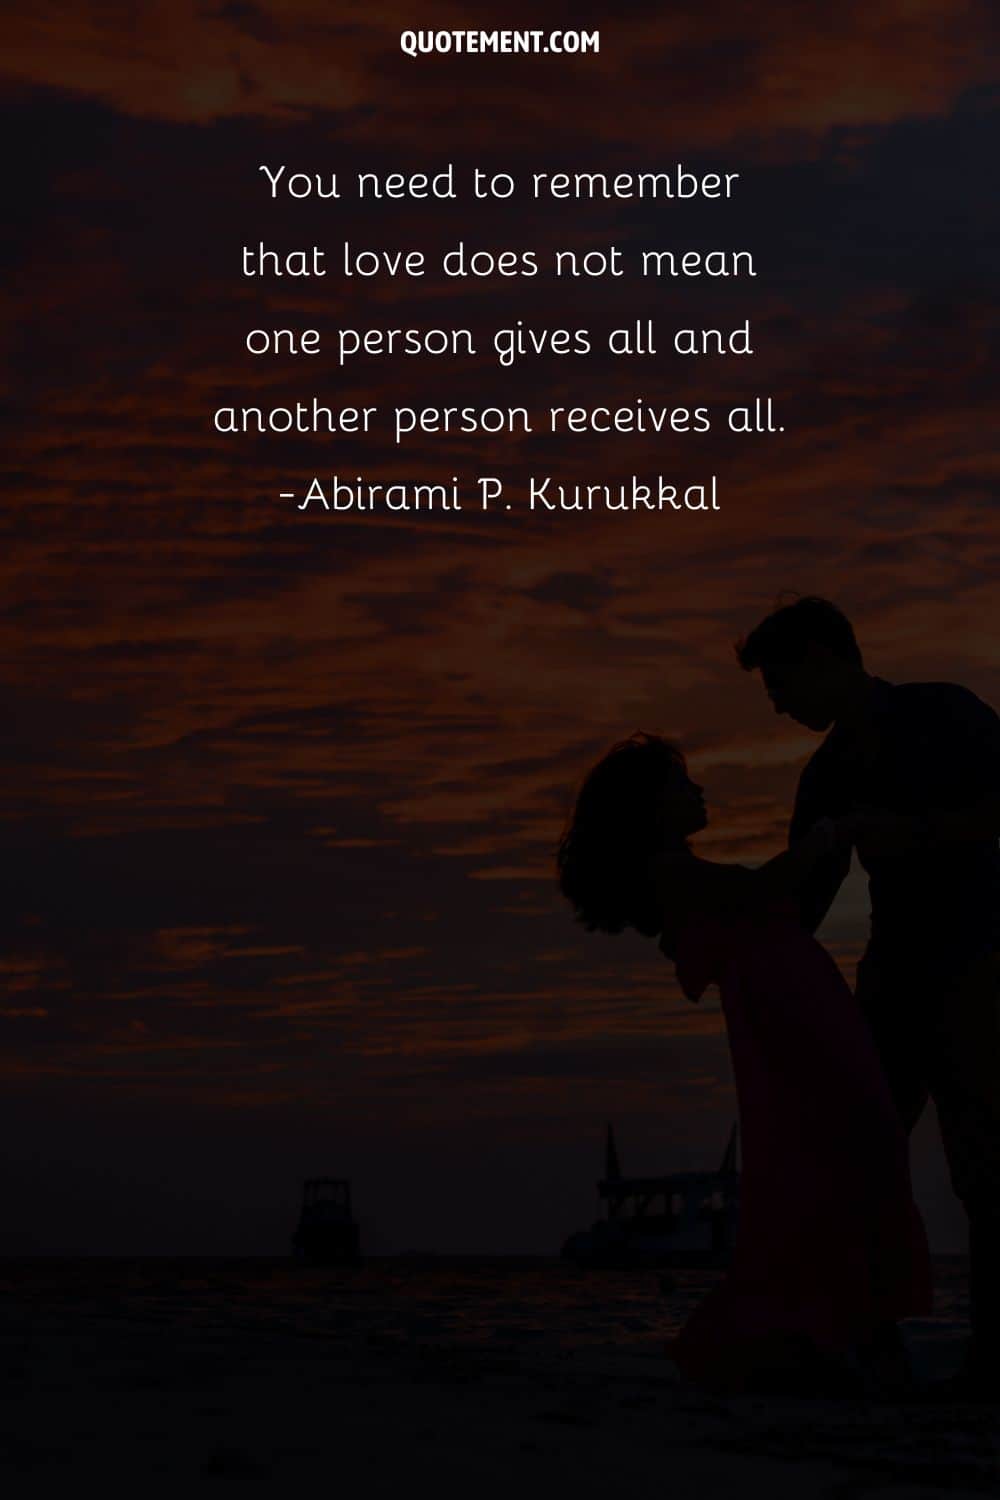 teenage couple image representing love quote for teenagers